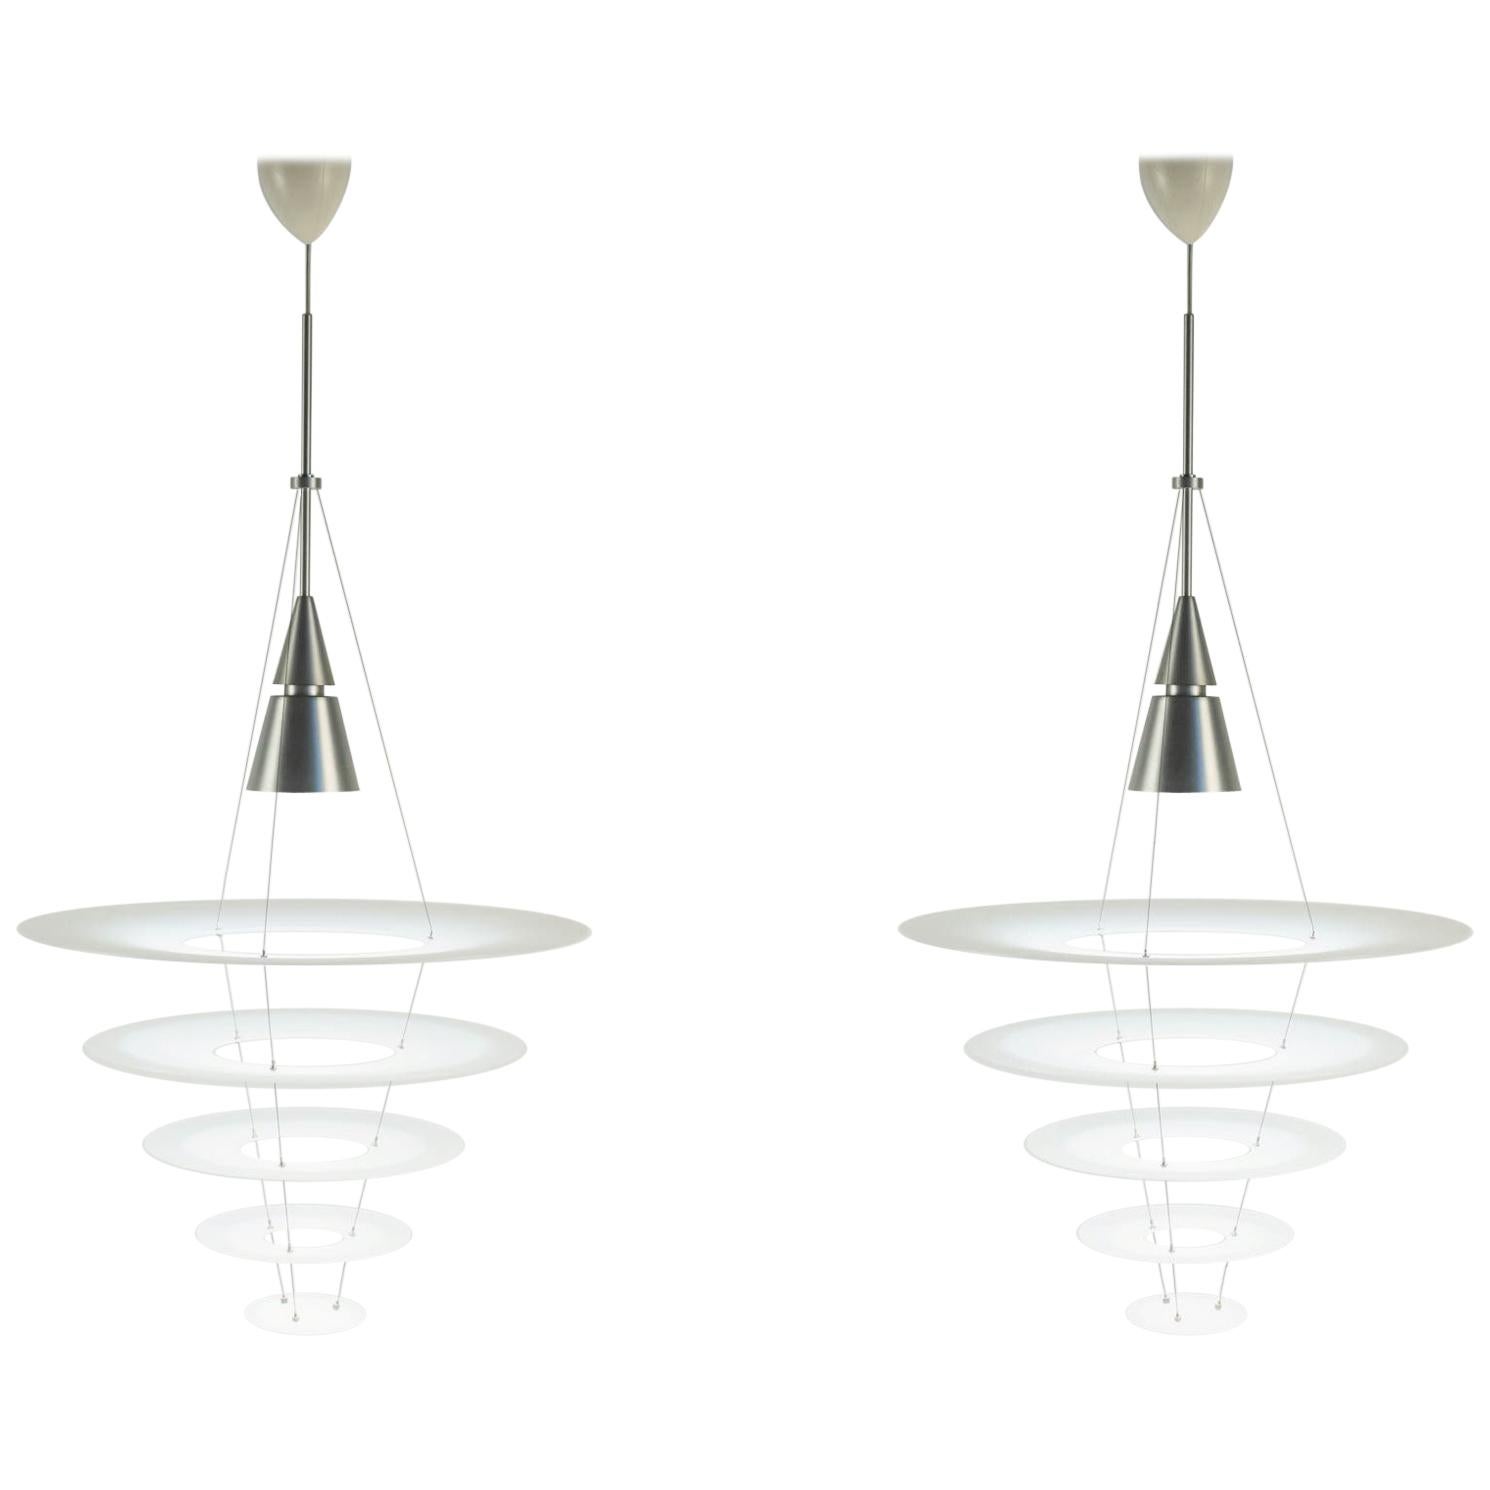 Pair of Hanging Light Fixture, Contemporary, from the House of Louis Poulsen